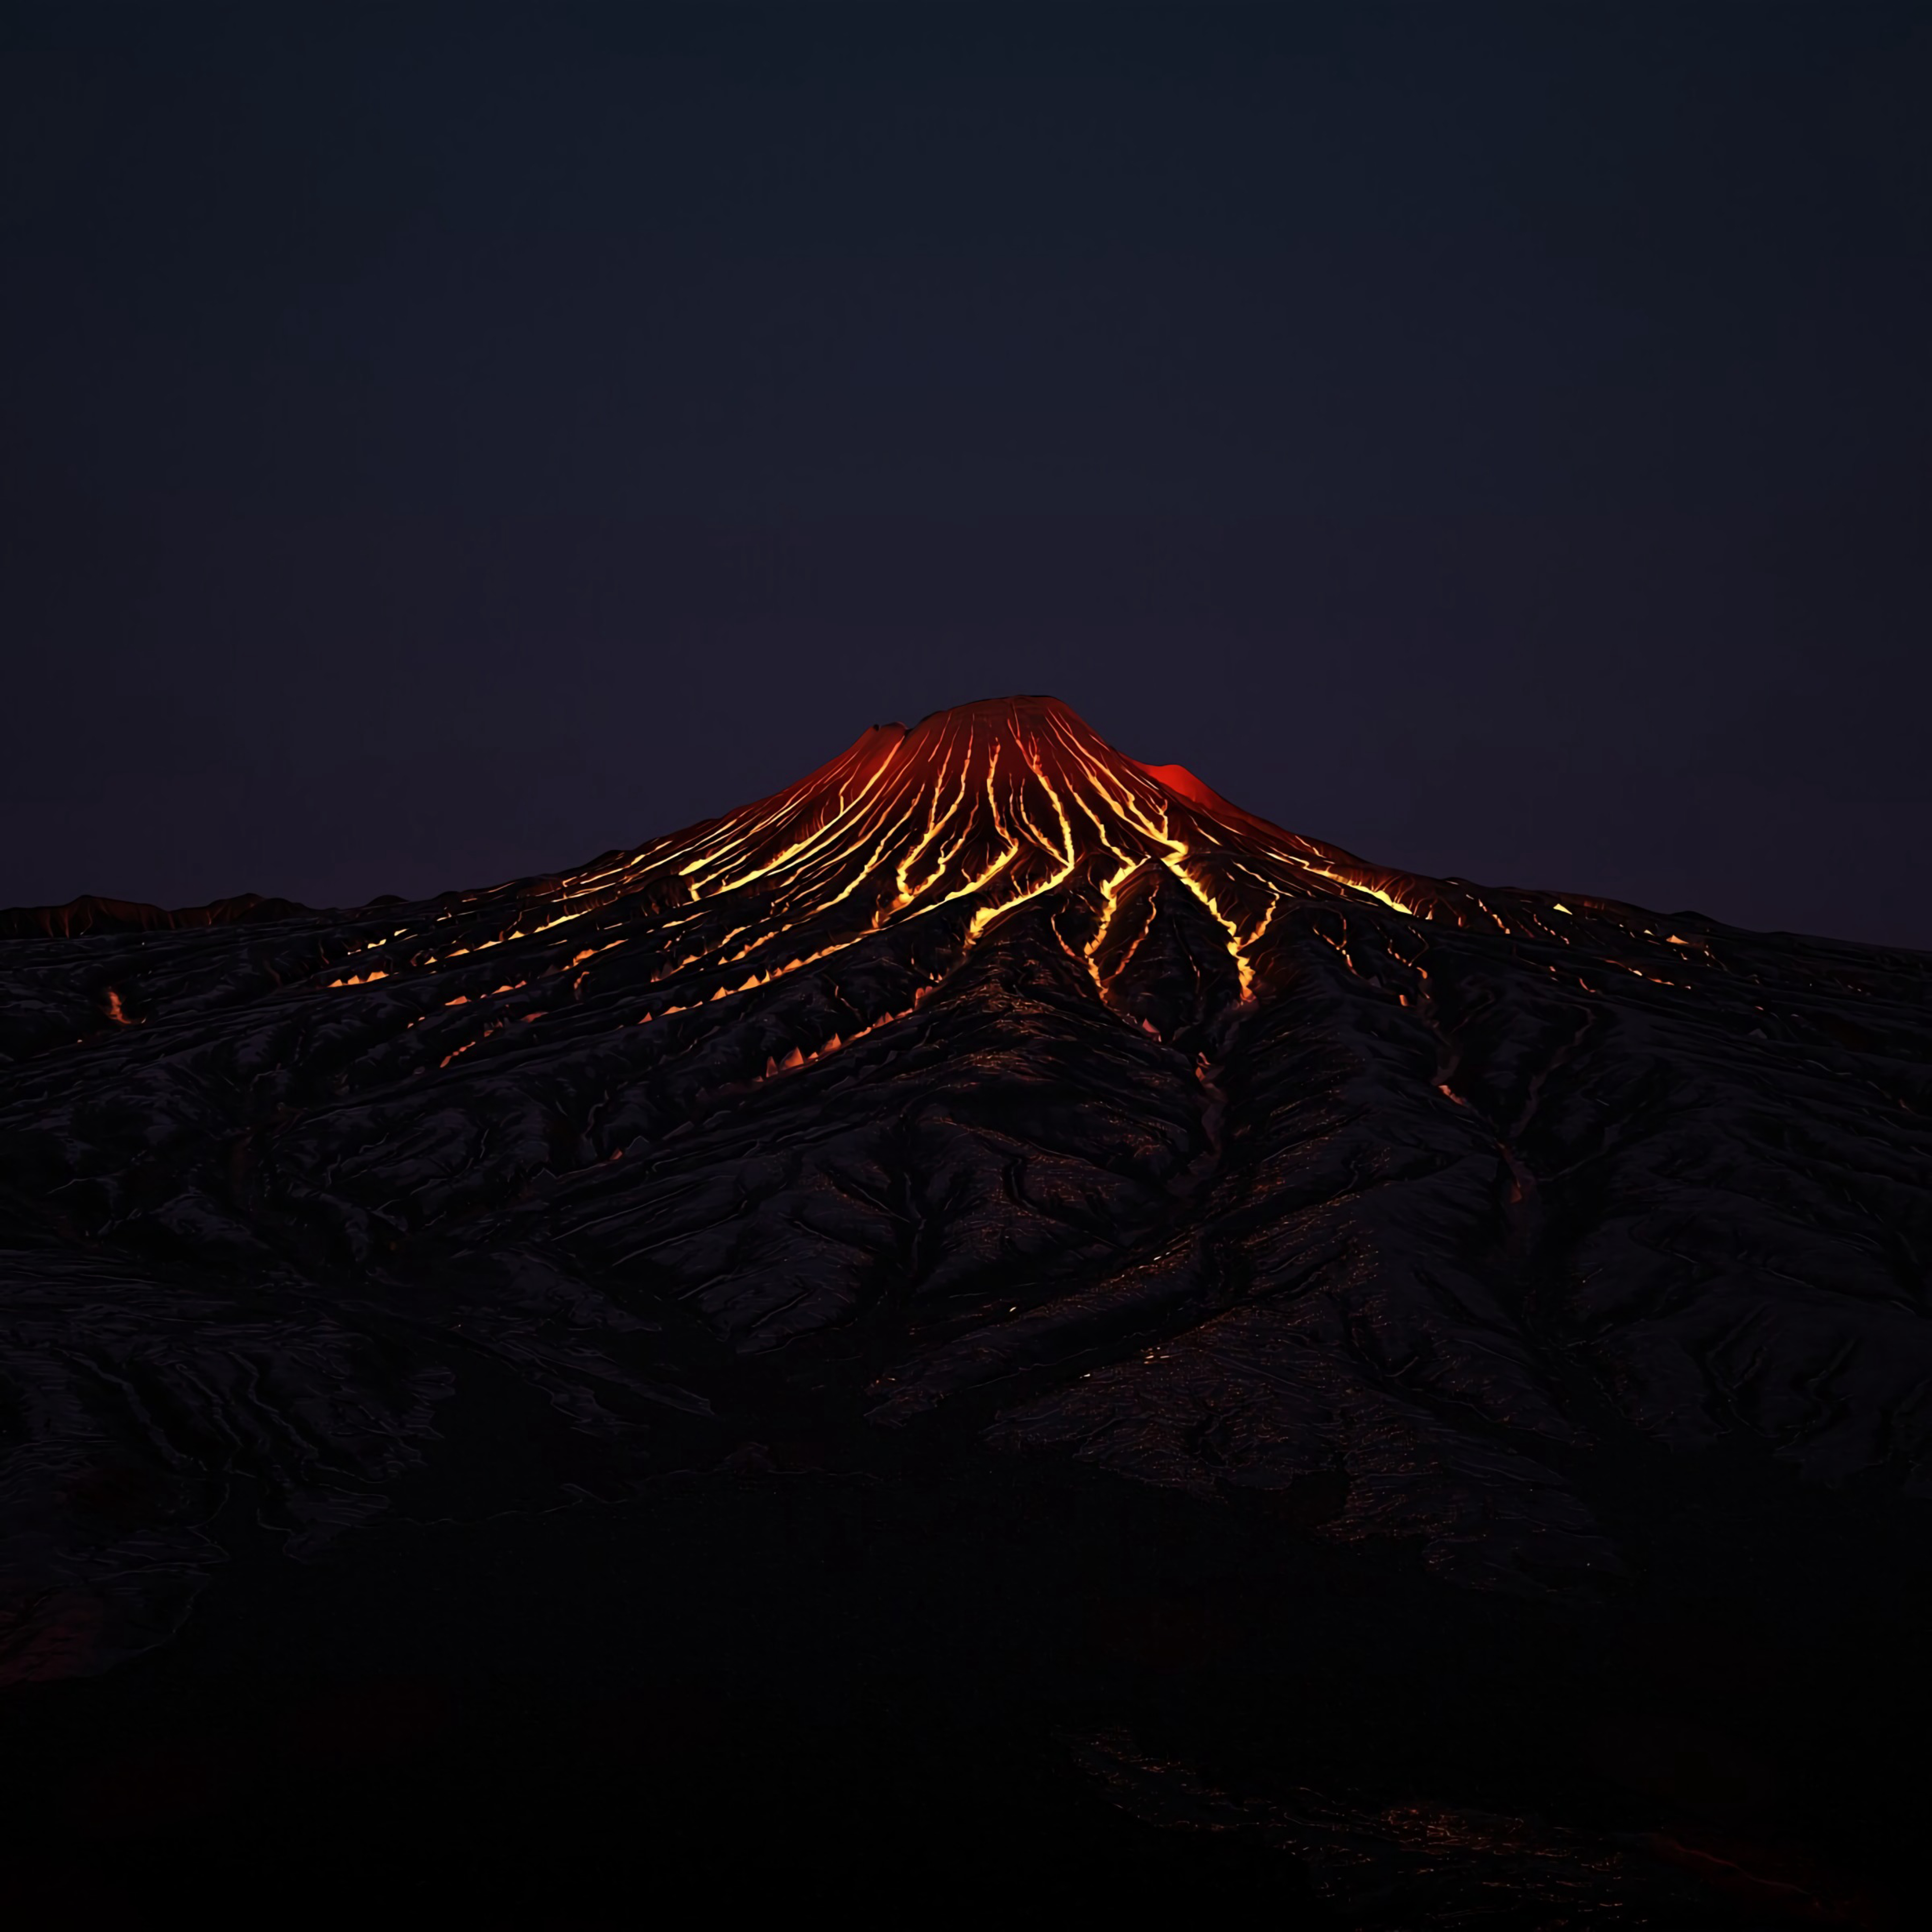 148507 download wallpaper dark, volcano, lava, hot, crater screensavers and pictures for free